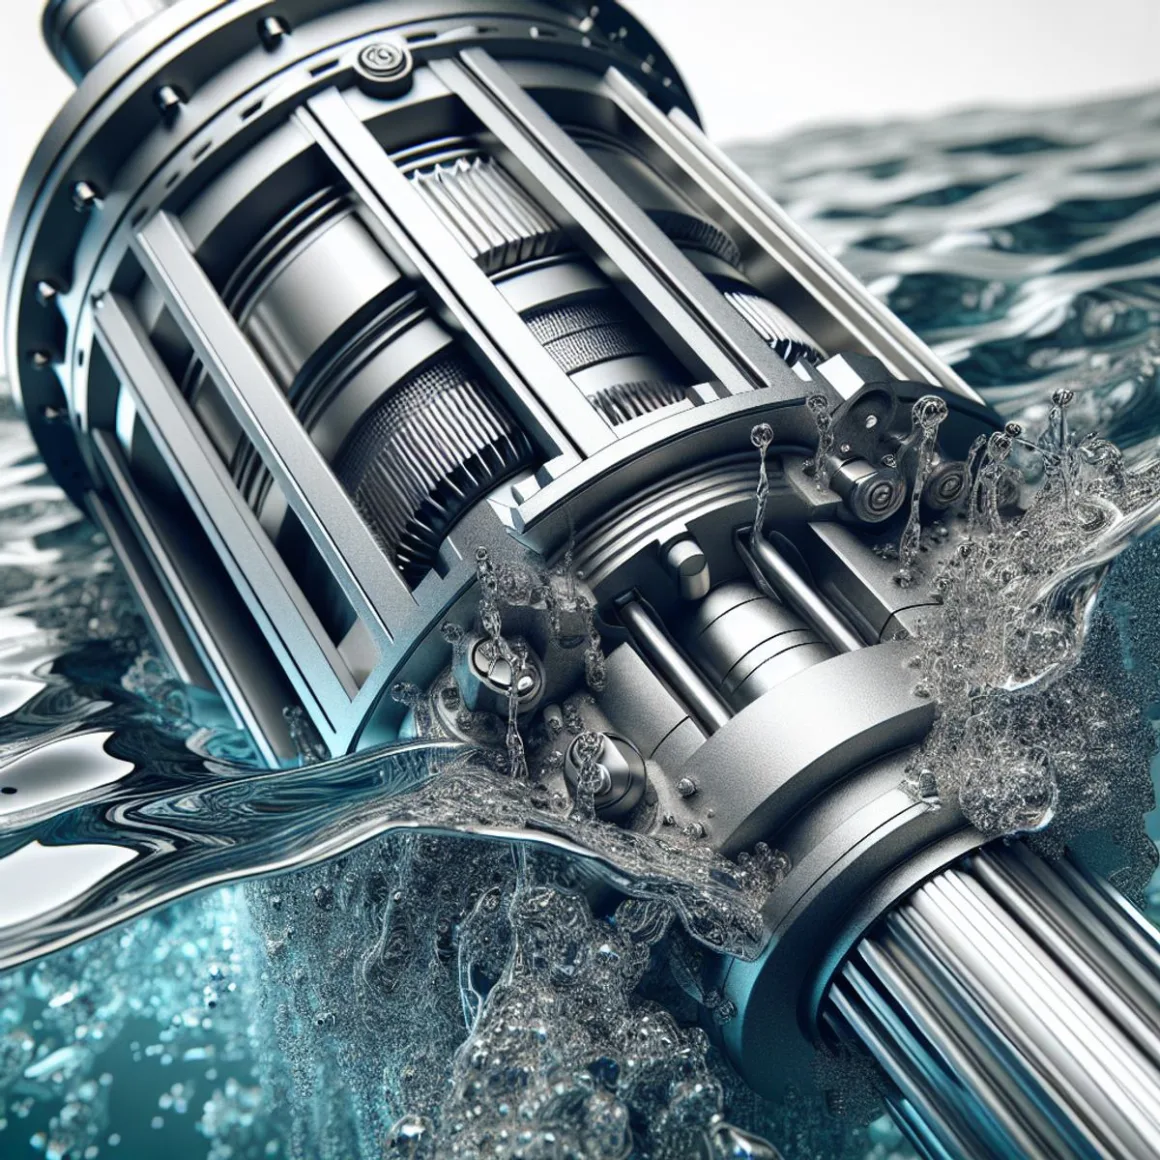 A close-up of a modern submersible well pump in operation, with clear water flowing through it.